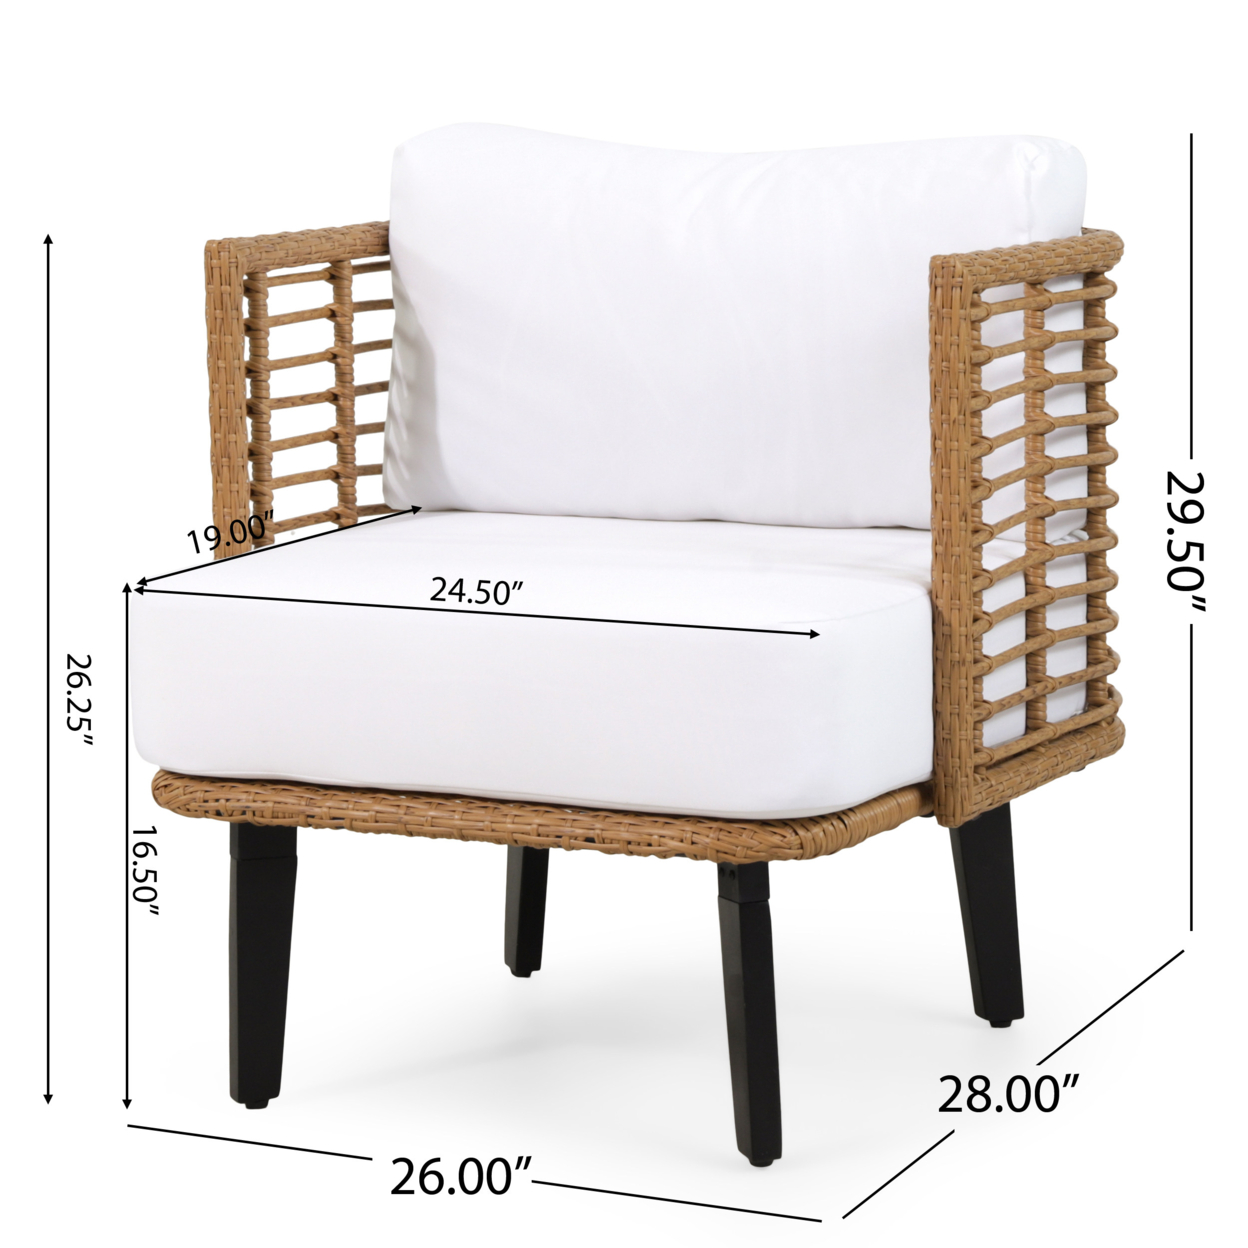 Rauser Outdoor Wicker Club Chair With Water Resistant Cushion, Set Of 2, Light Brown And White